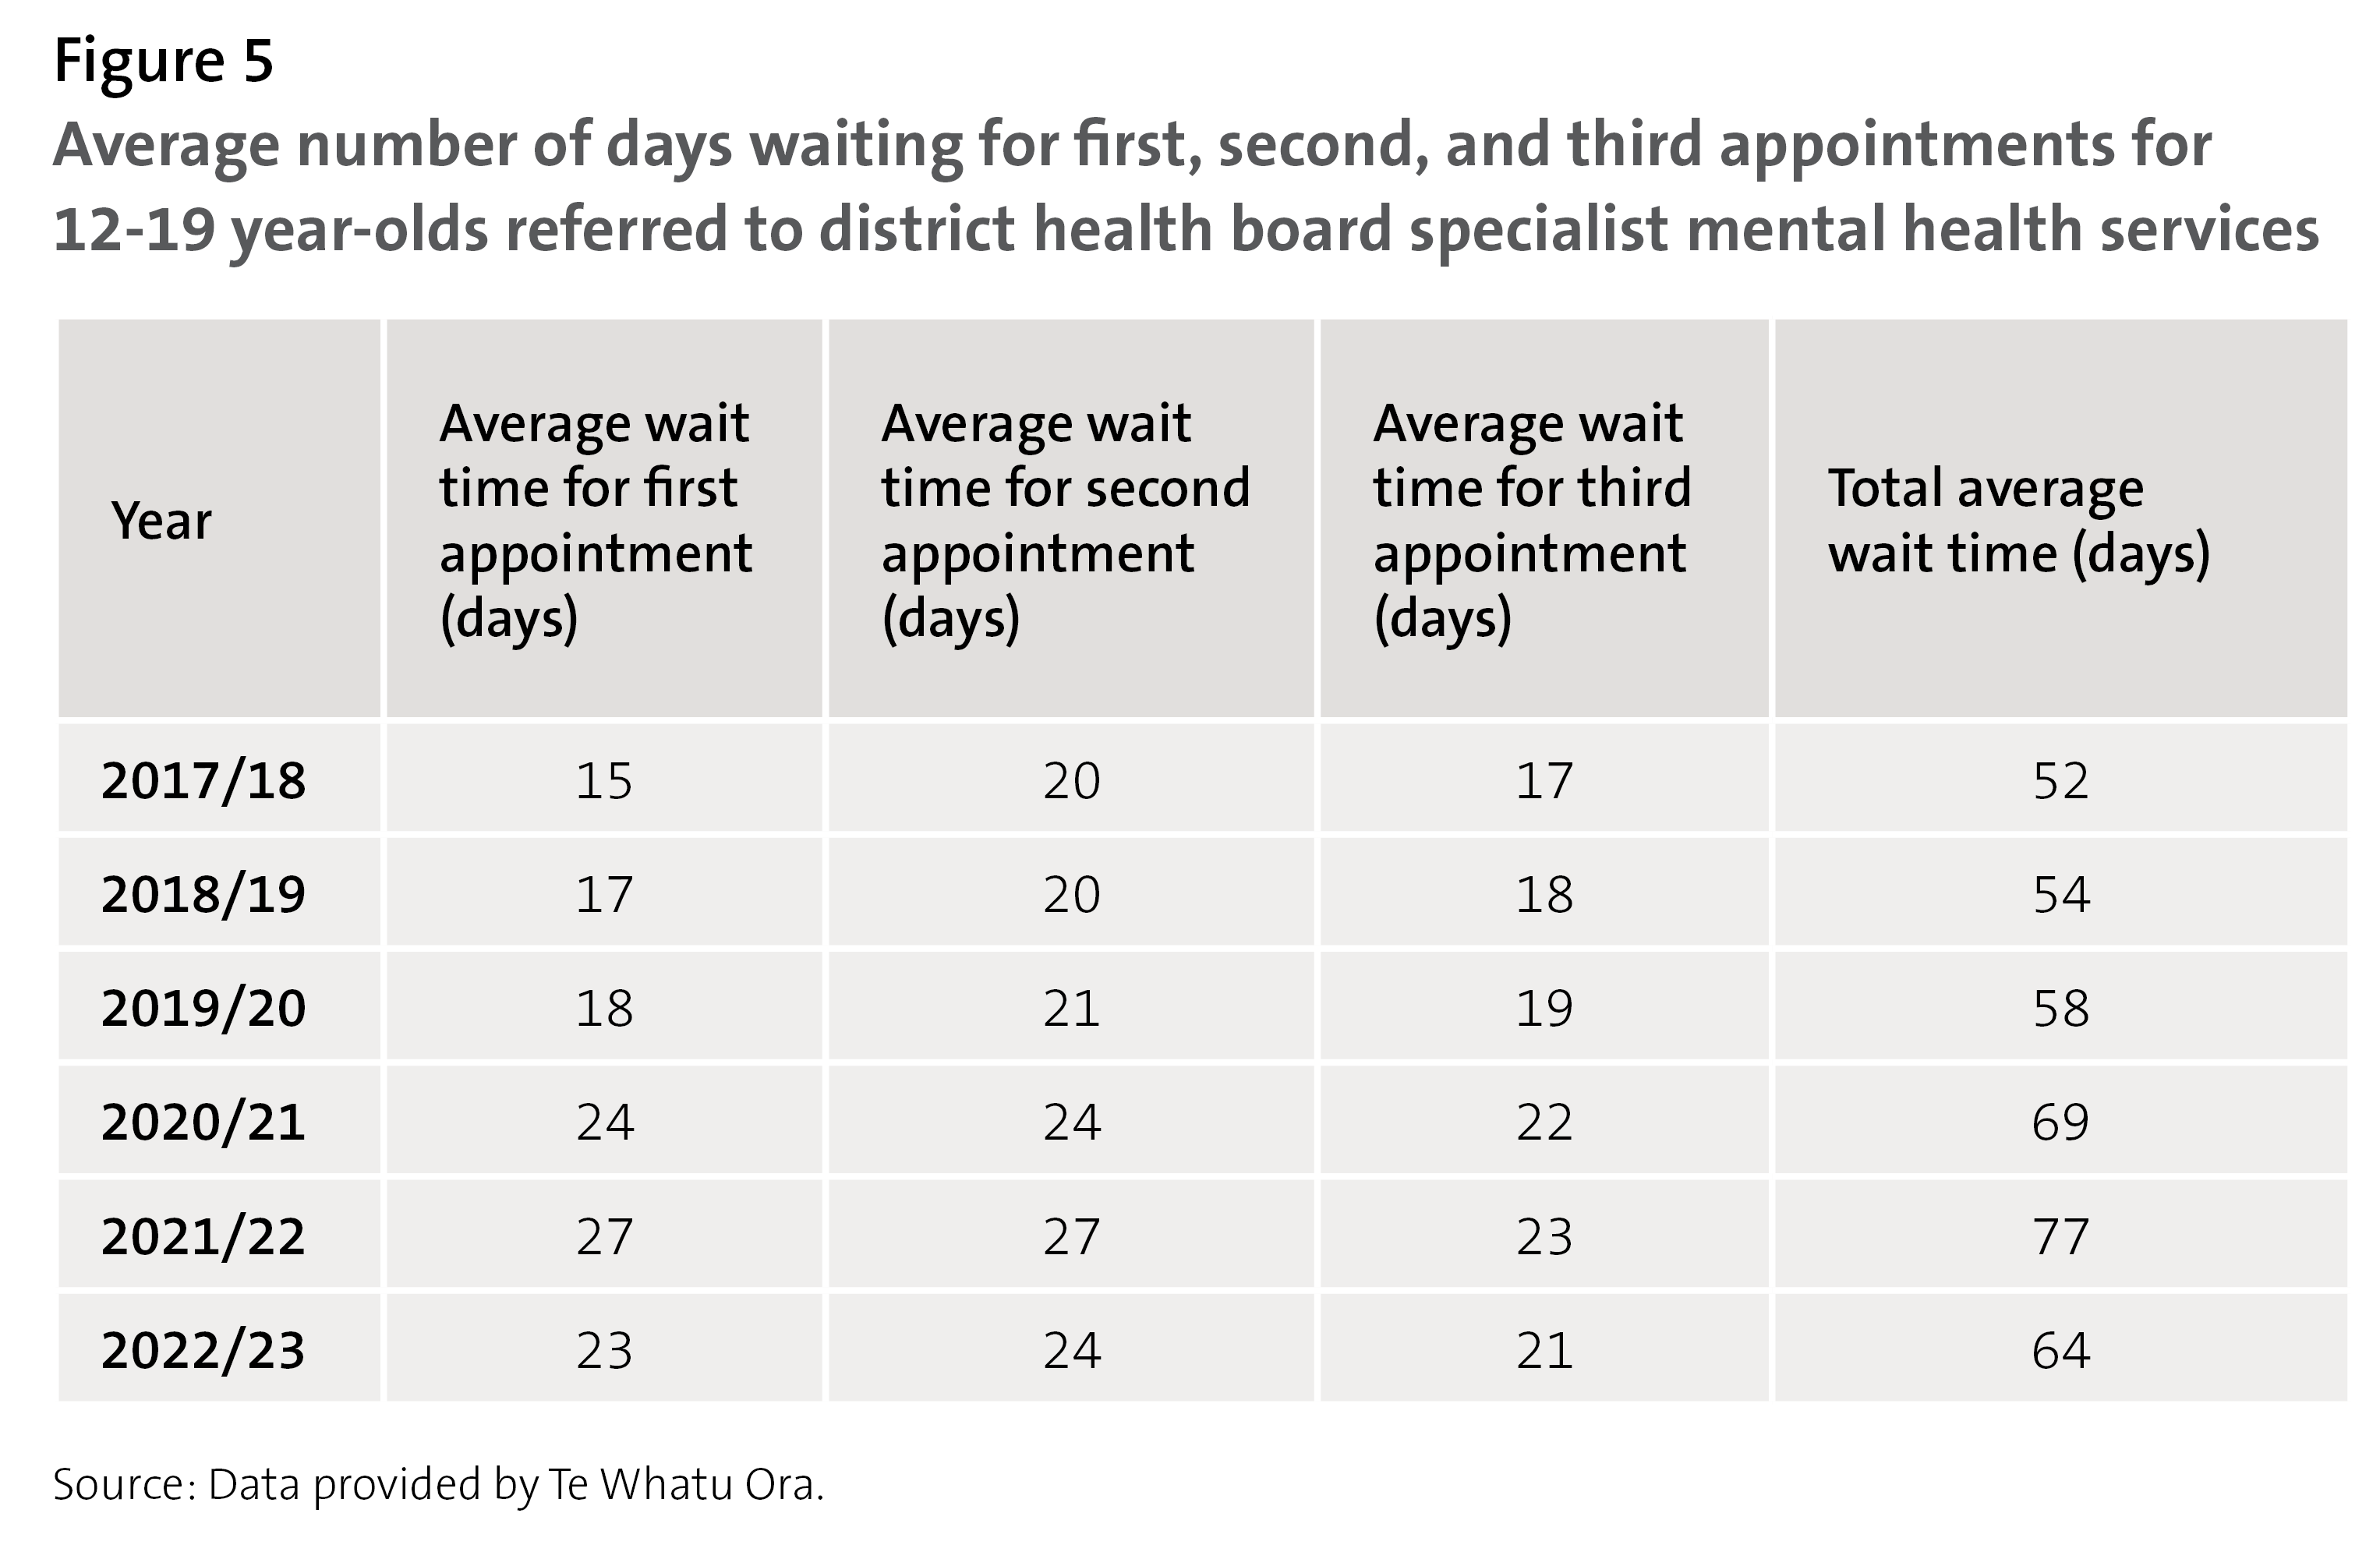 Figure 5: Average number of days waiting for first, second, and third appointments for 12-19 year-olds referred to district health board specialist mental health services